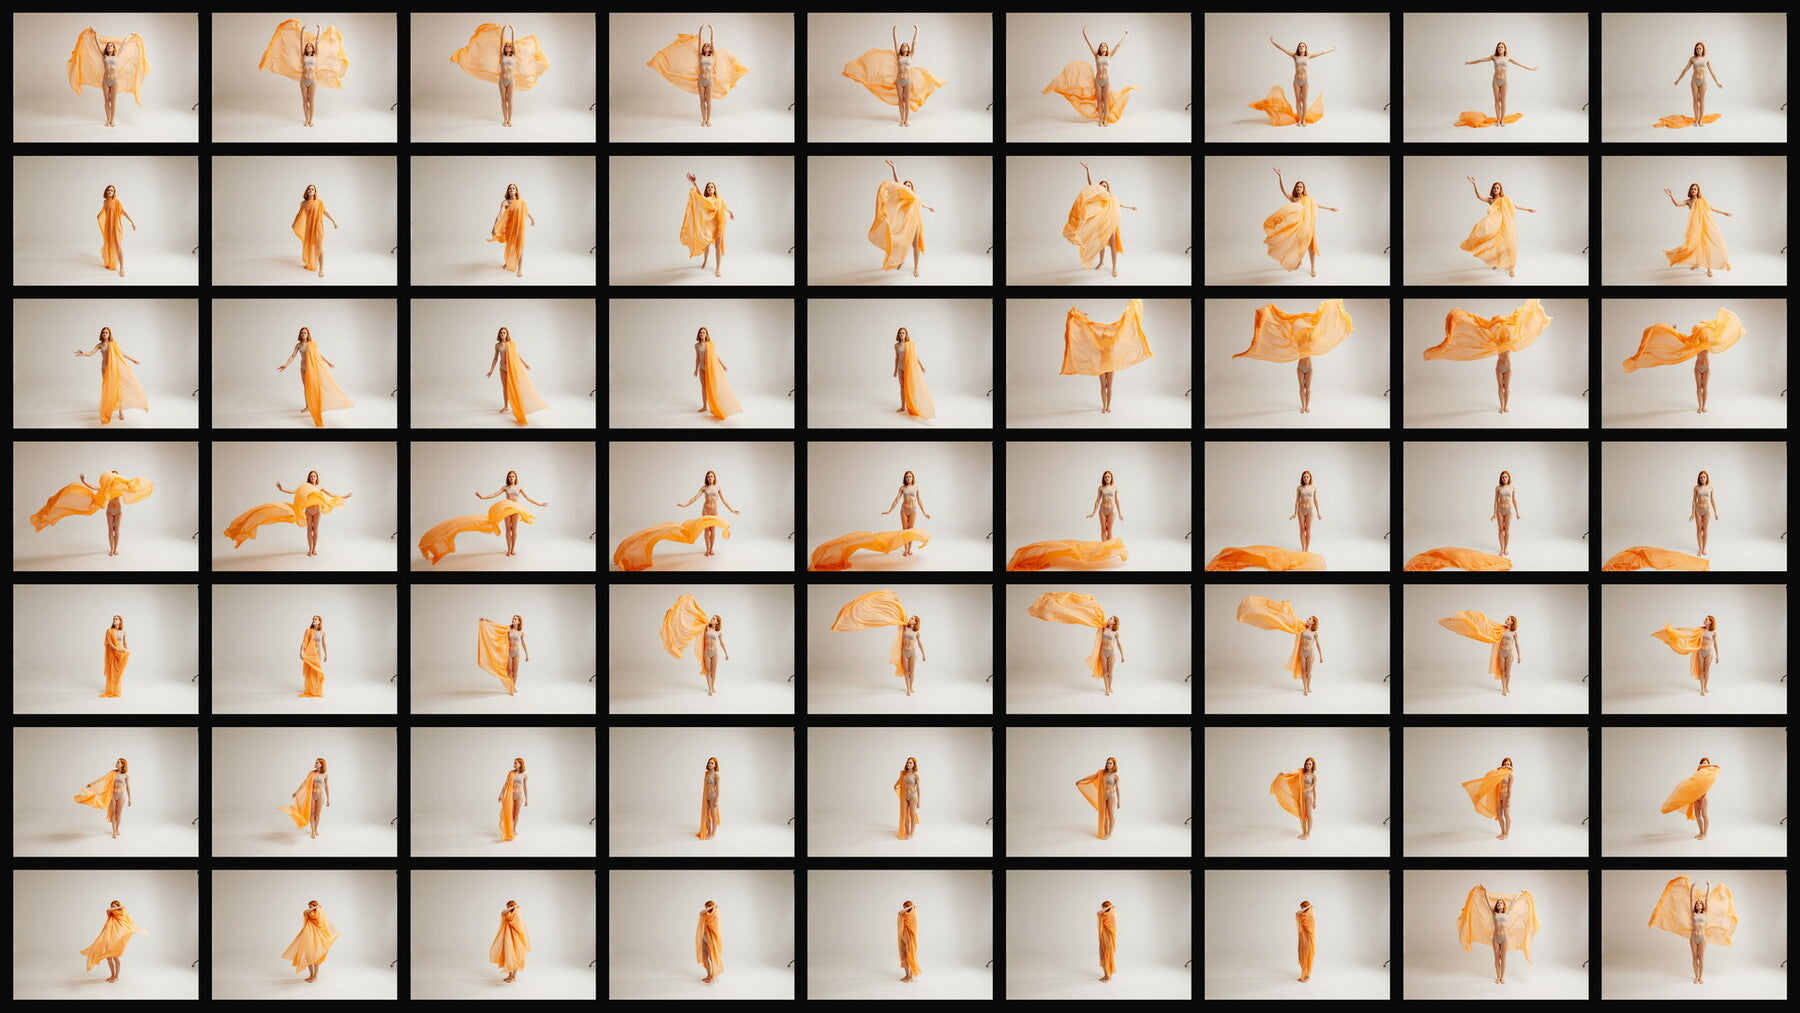 170 Reference Photos - Fabric In Motion ( Sequential Movement )